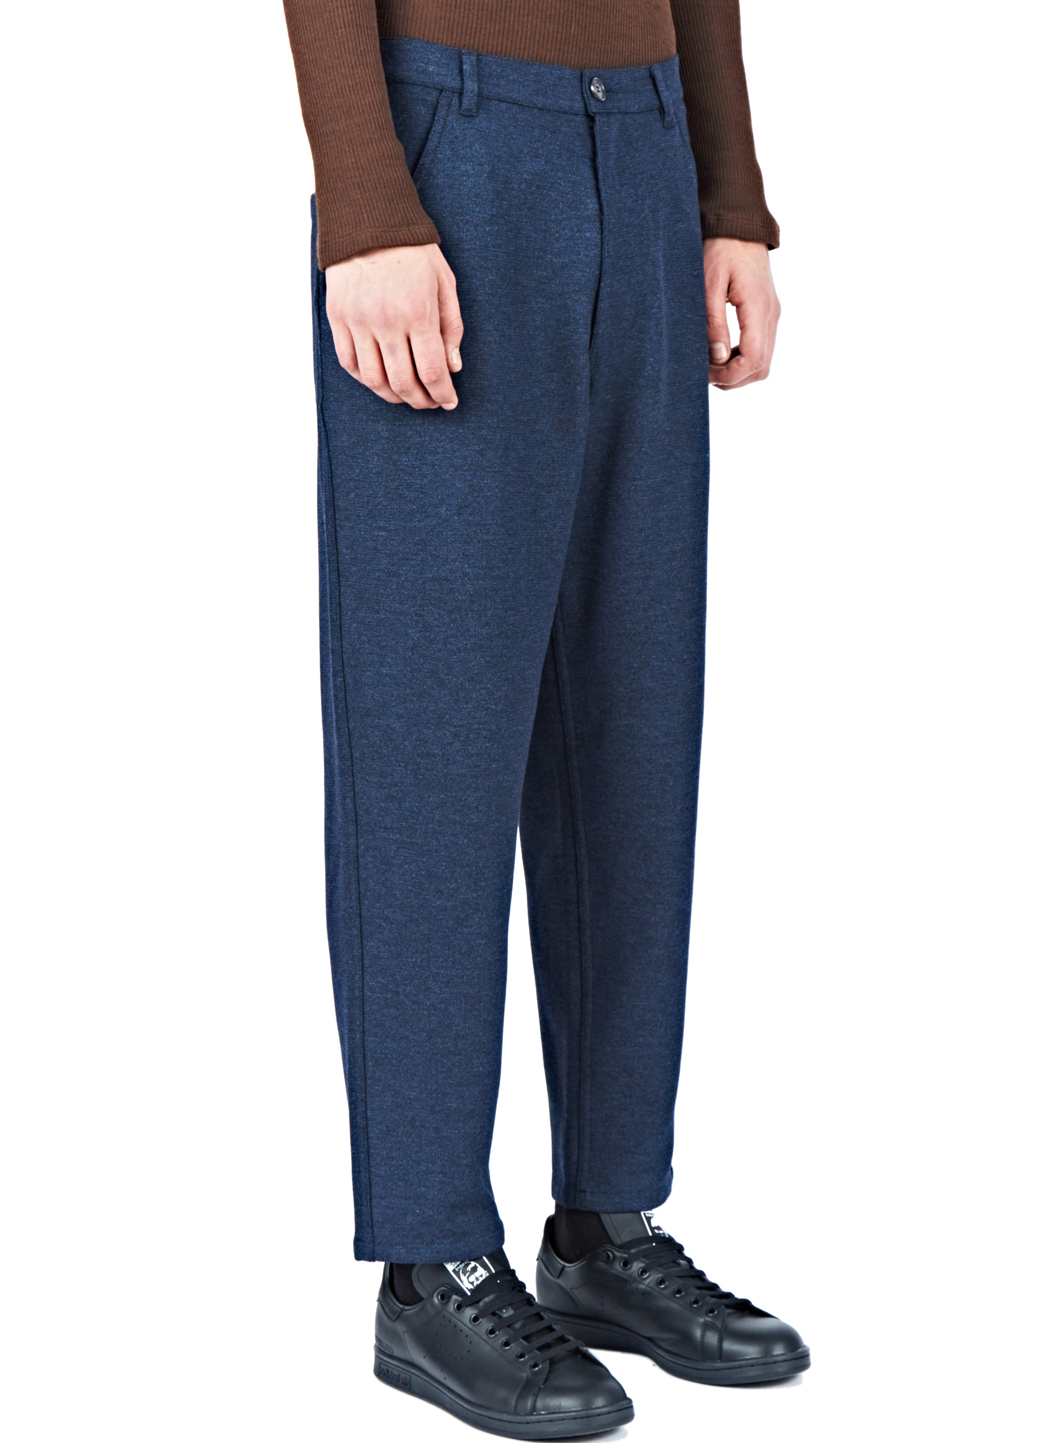 Raf simons Relaxed Fit Chino Pants in Blue for Men | Lyst